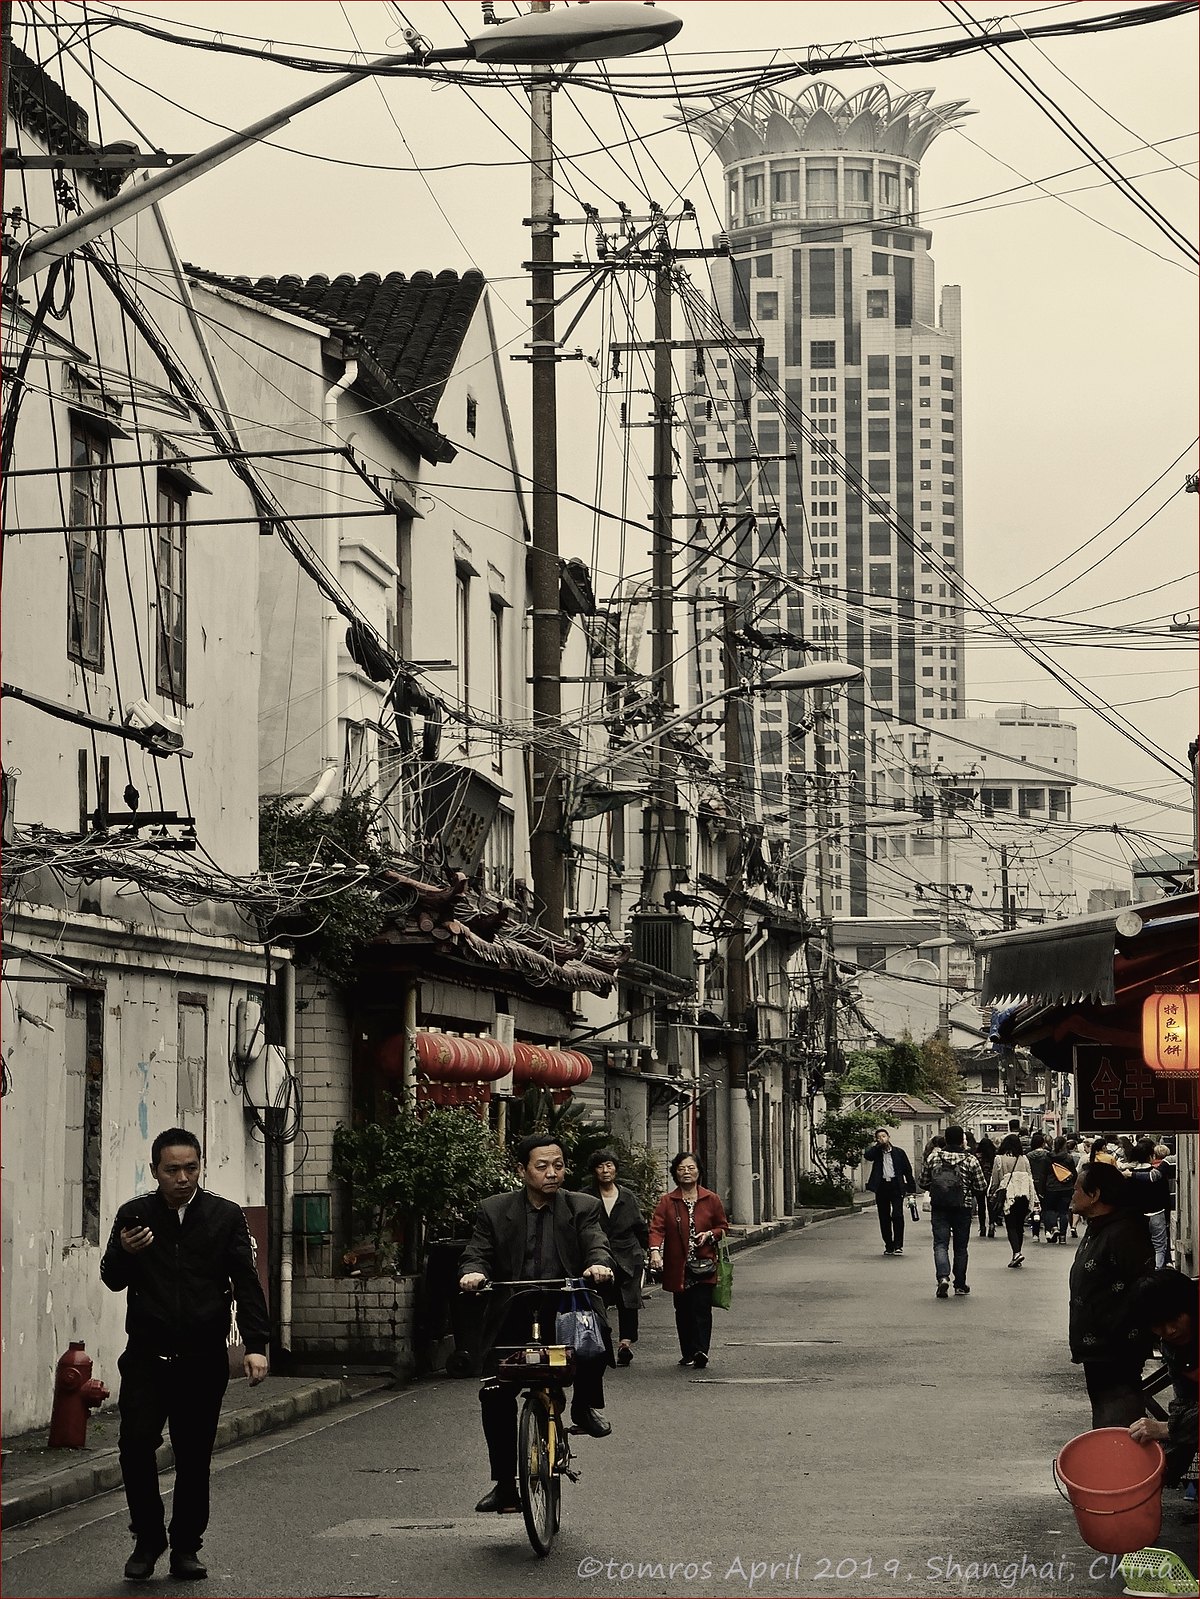 The streets of Shanghai, China.